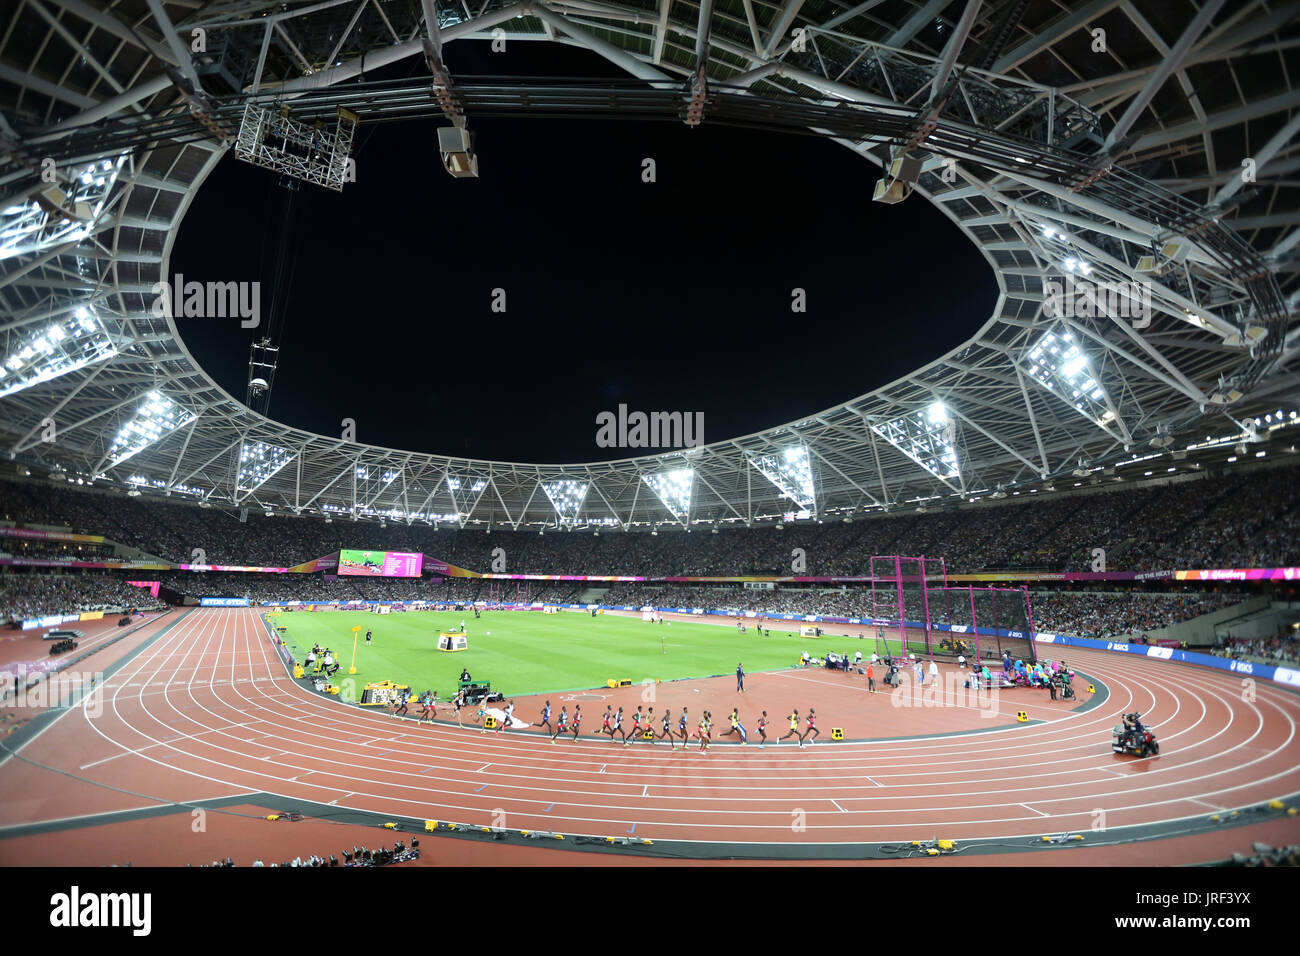 London, UK. 04-Aug-17. Stadium vie during the 10000m race at the 2017 IAAF World Championships, Queen Elizabeth Olympic Park, Stratford, London, UK. Credit: Simon Balson/Alamy Live News Stock Photo